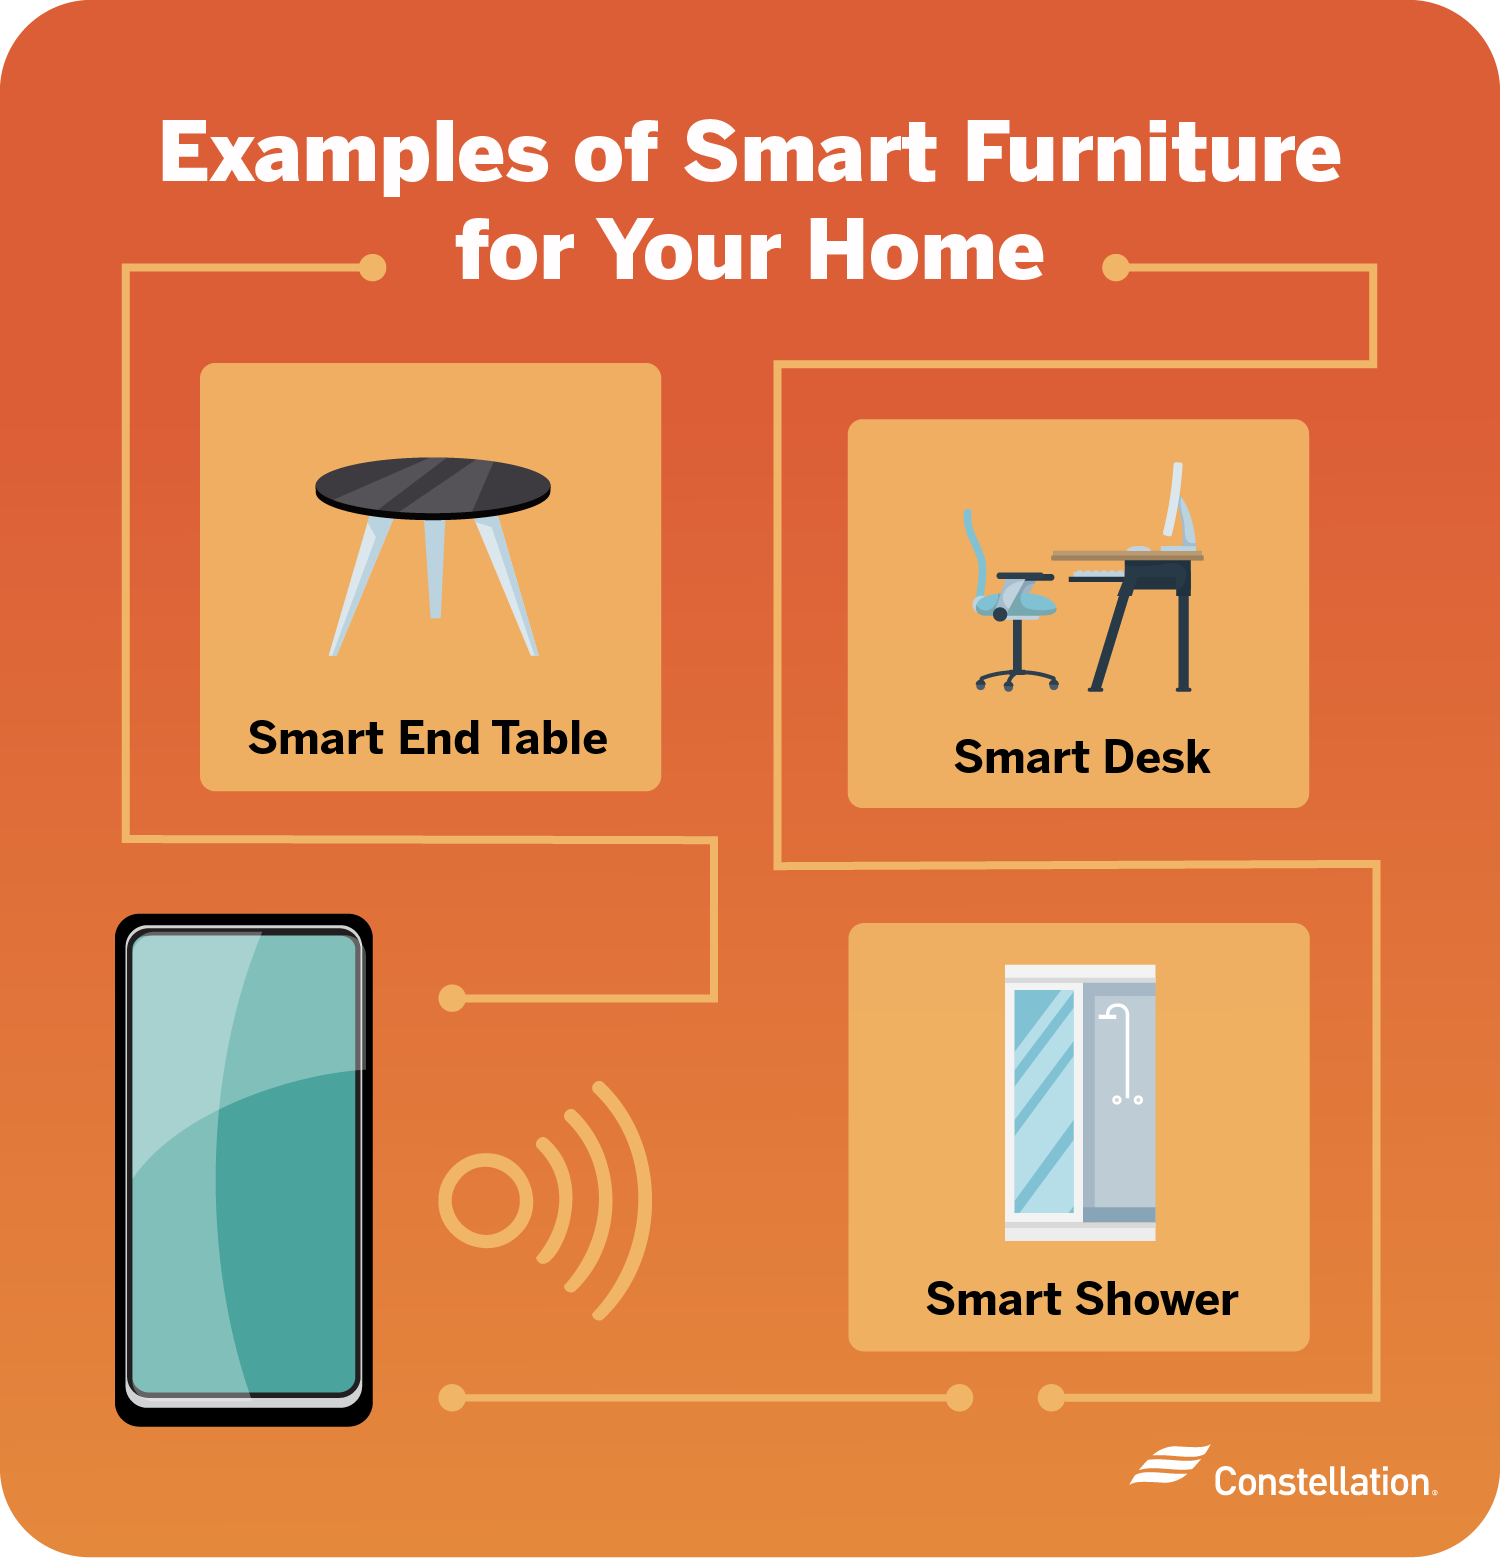 Examples of smart furniture for your home.